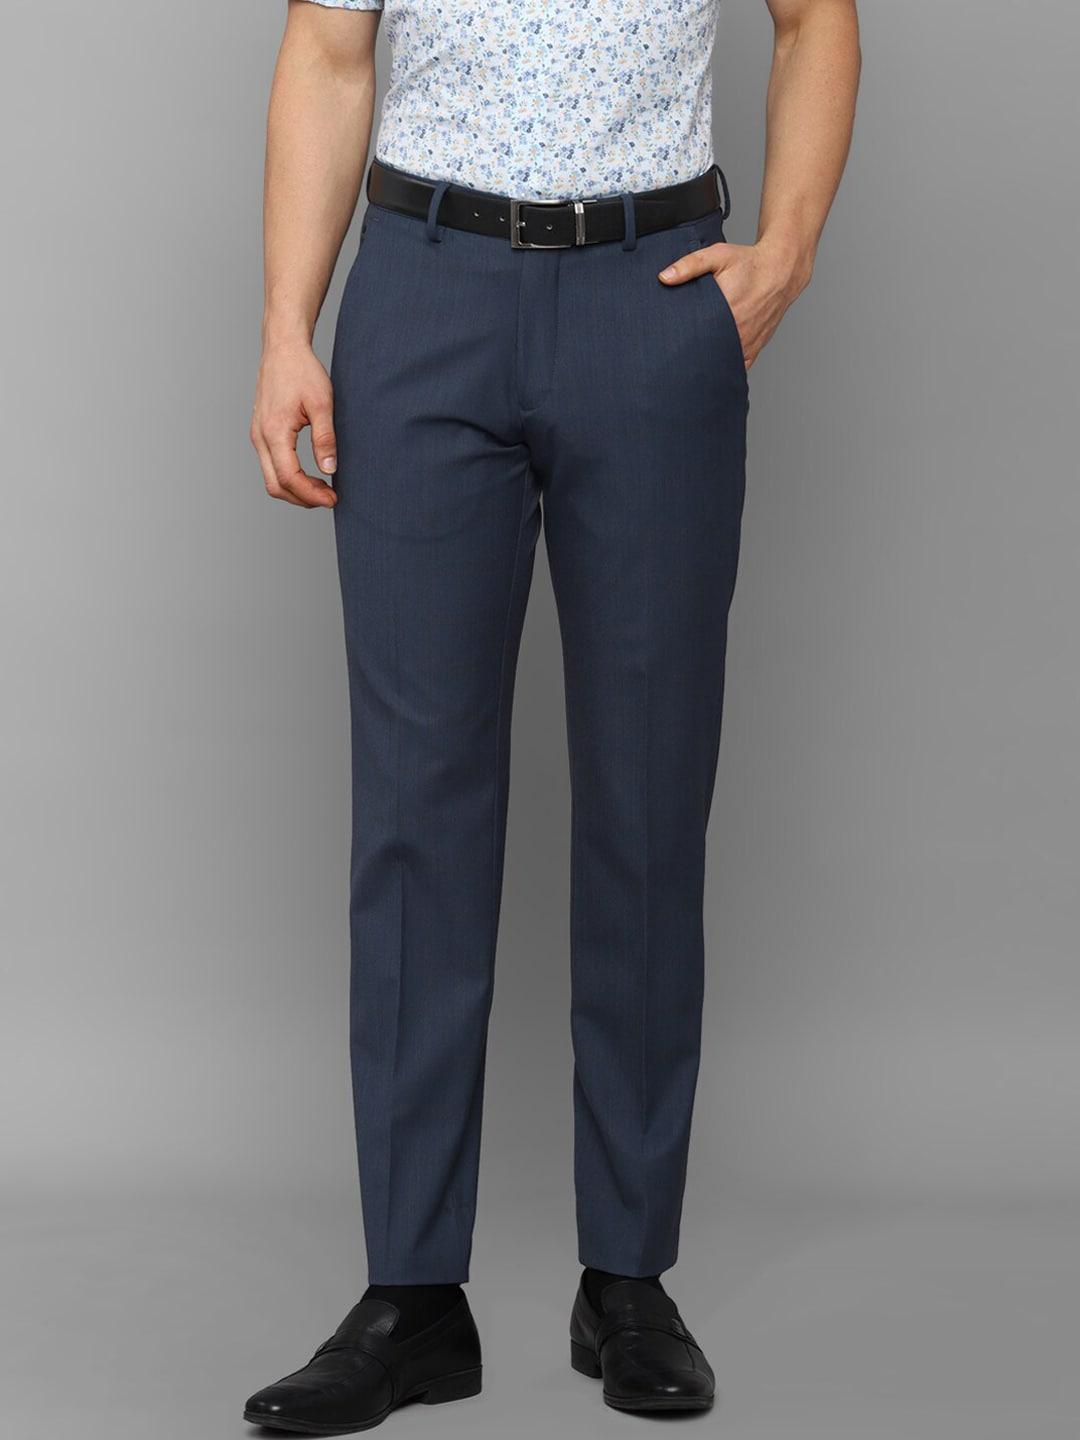 louis-philippe-men-solid-navy-blue-straight-fit-trousers